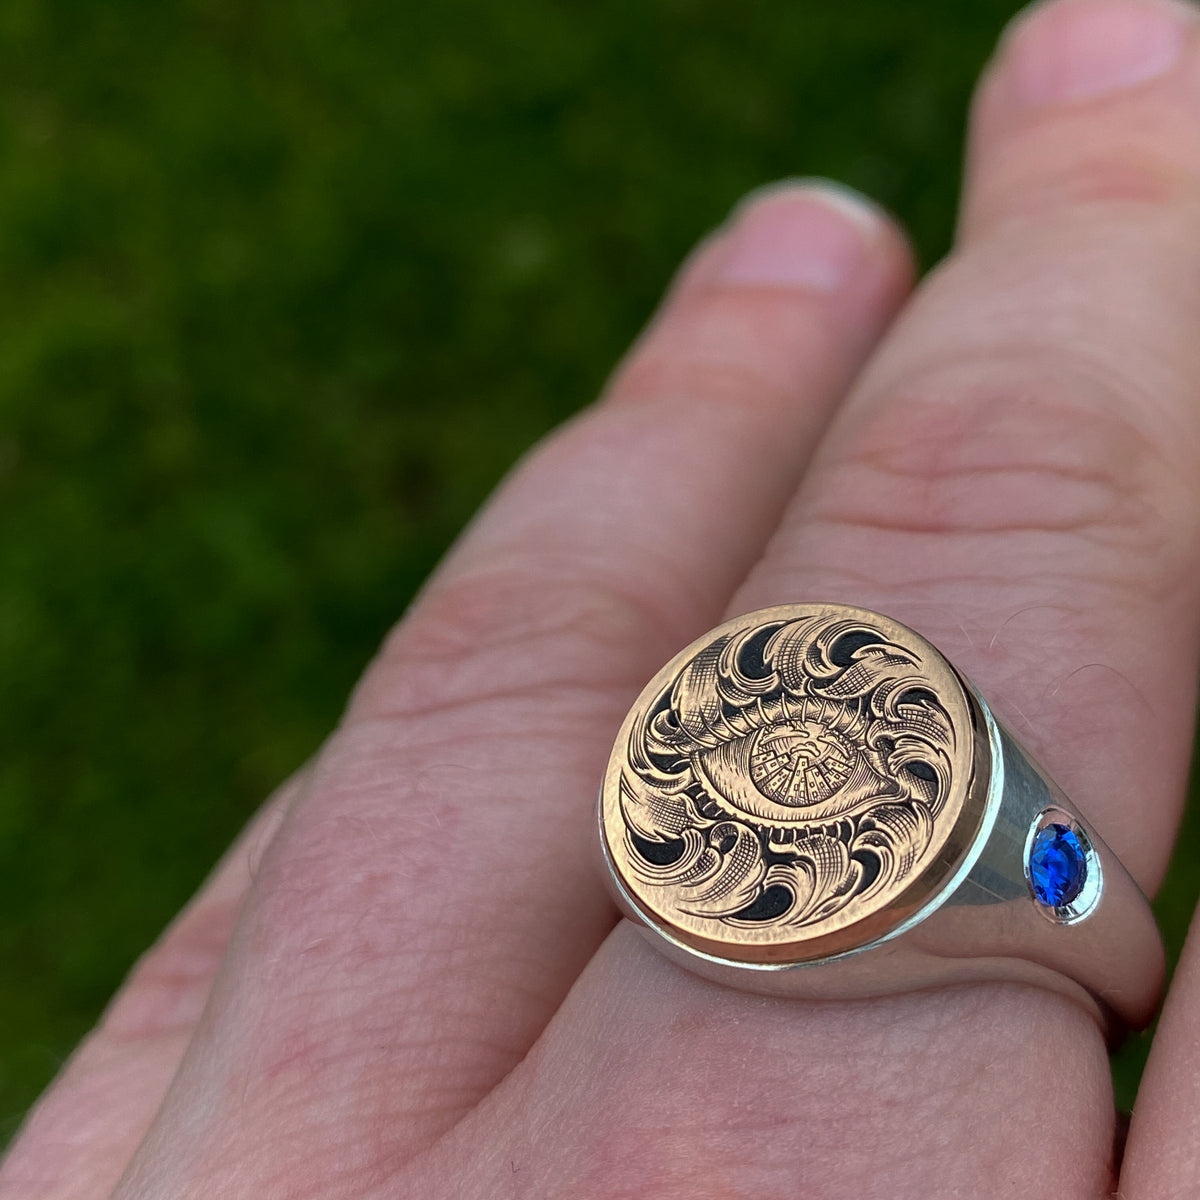 Hand engraved jewellery round signet ring with fantasy leaf scroll work around an eye with city scape in iris. Shoulder set with blue sapphires. Made in 9 carat rose gold and silver. On finger for scale.